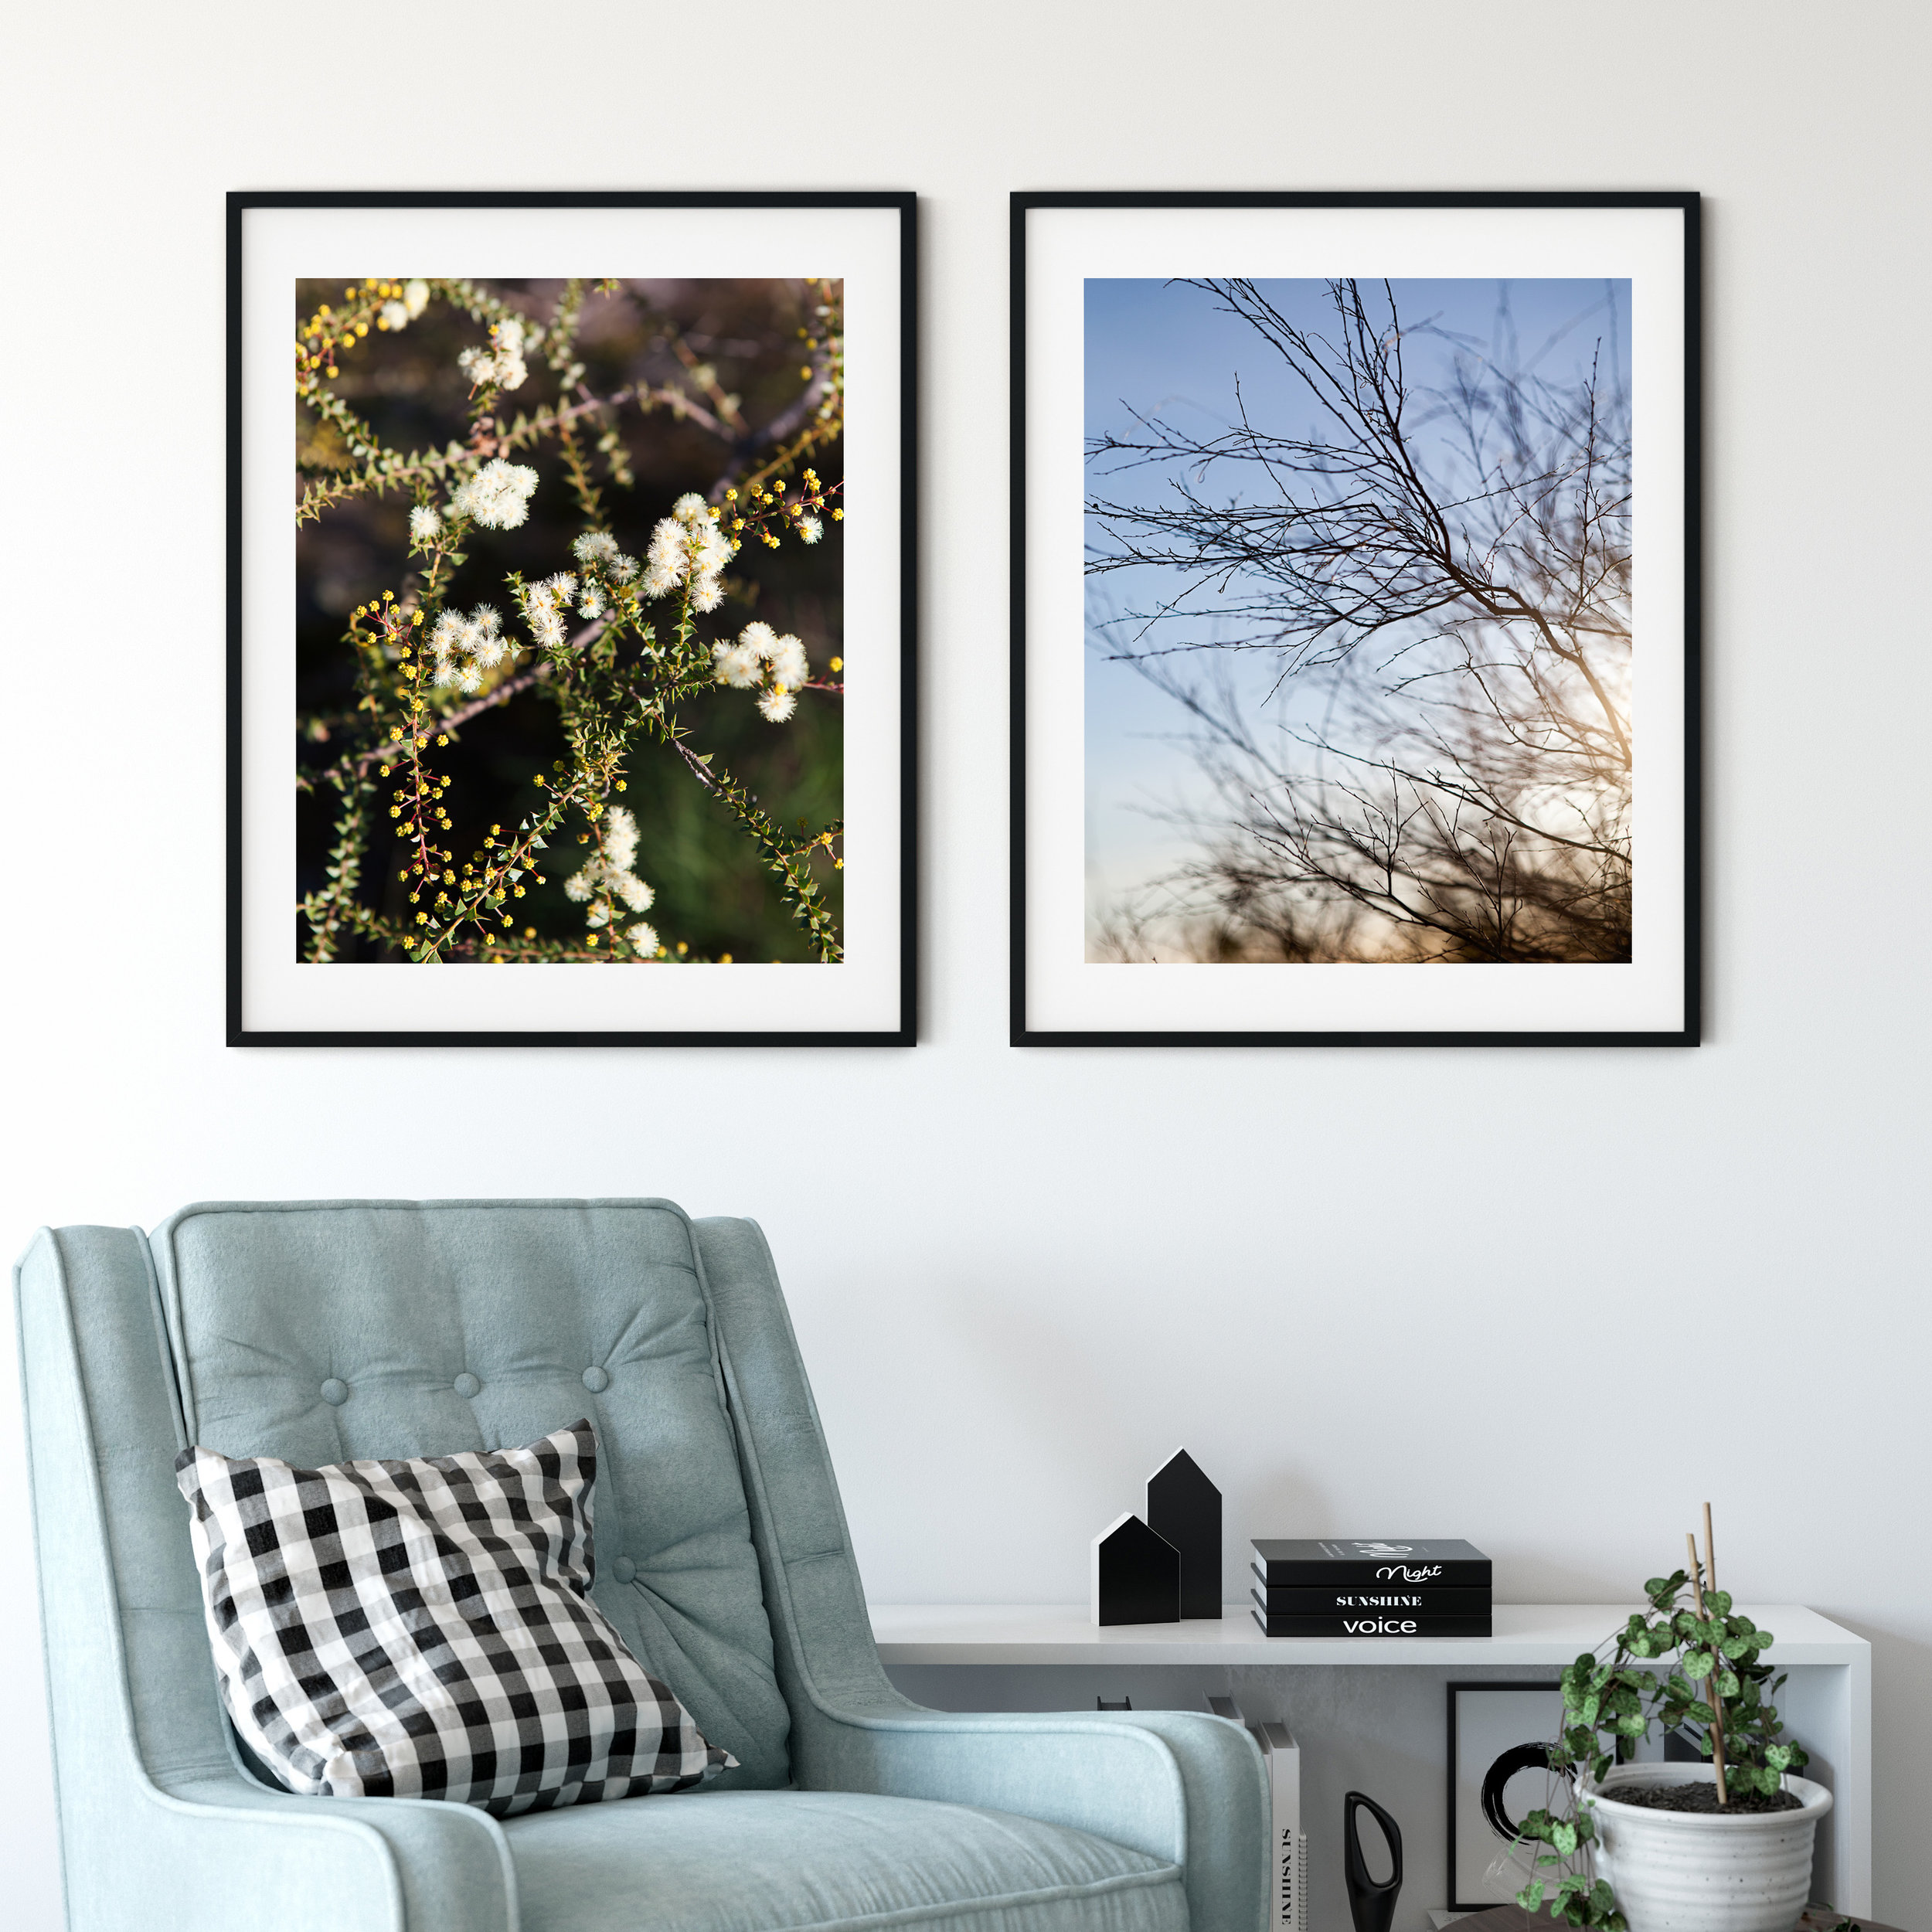 Bush Blossom + Twigs and Twitters - Photographic Print